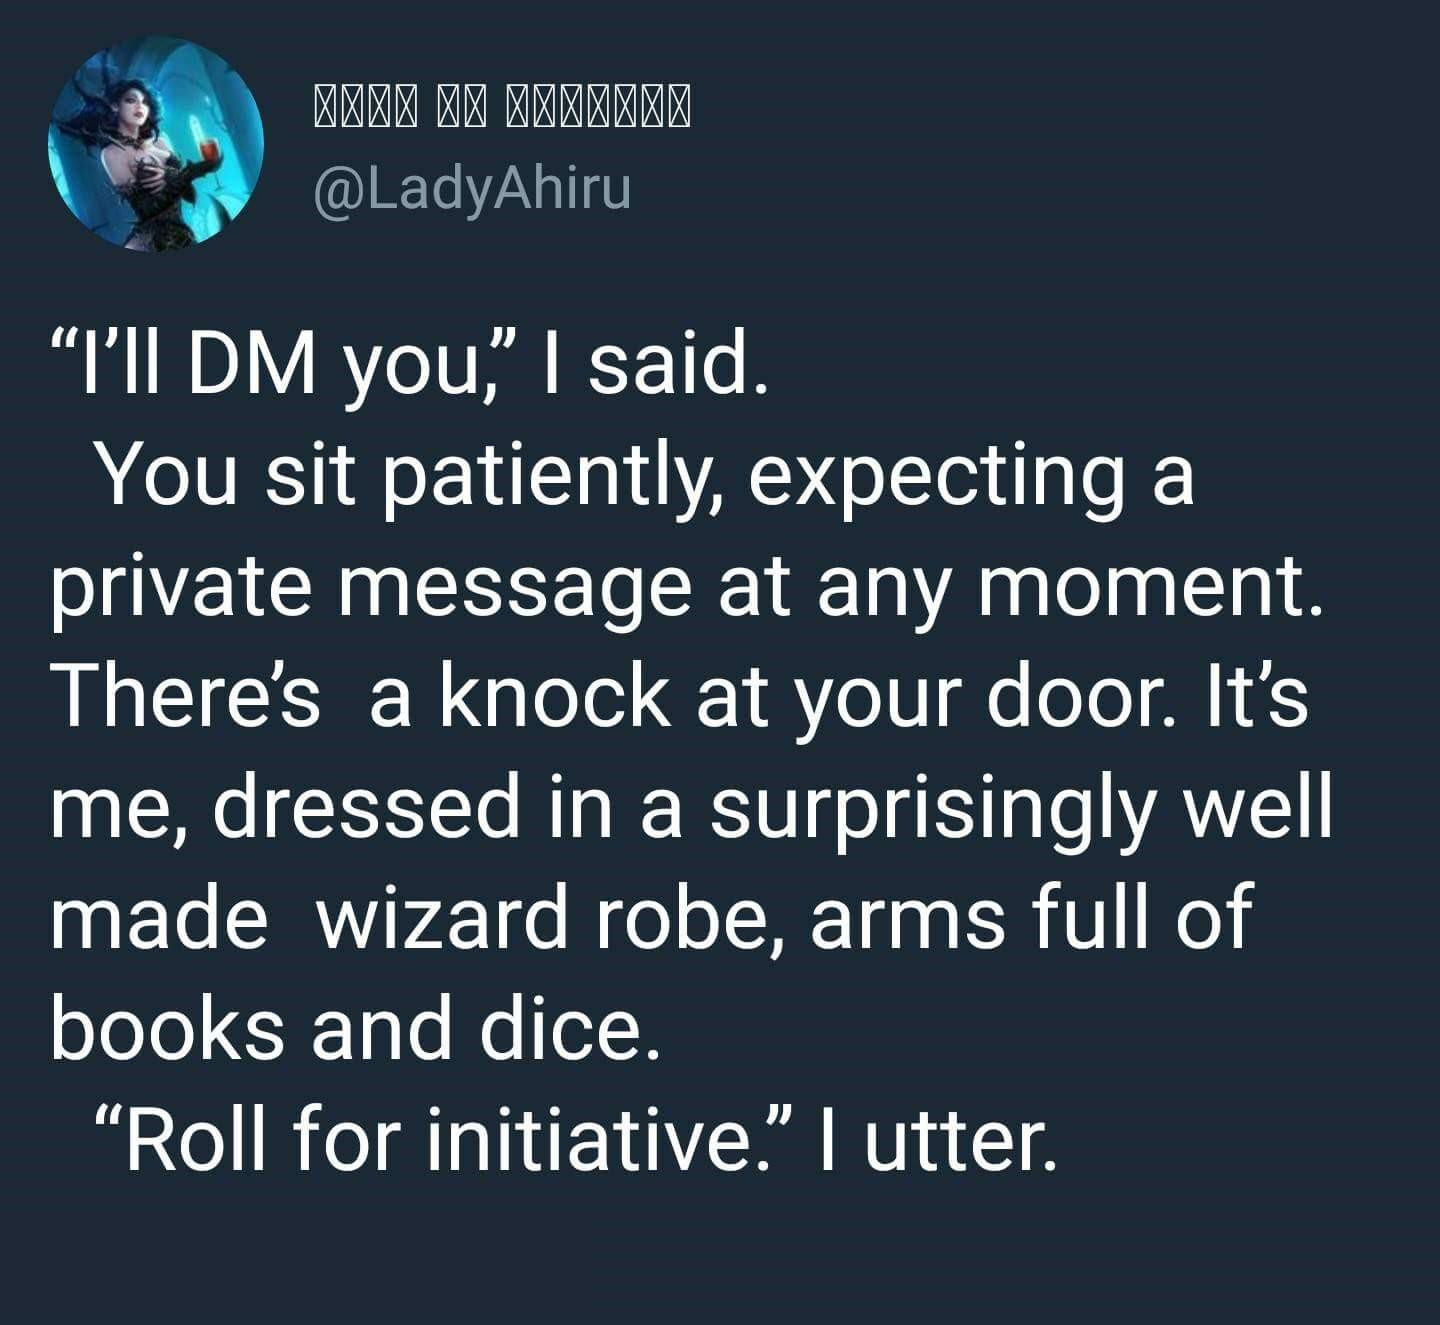 Stranger Things - Qqqqqqqqqqq "I'll Dm you," I said. You sit patiently, expecting a private message at any moment, There's a knock at your door. It's me, dressed in a surprisingly well made wizard robe, arms full of books and dice. "Roll for initiative." 